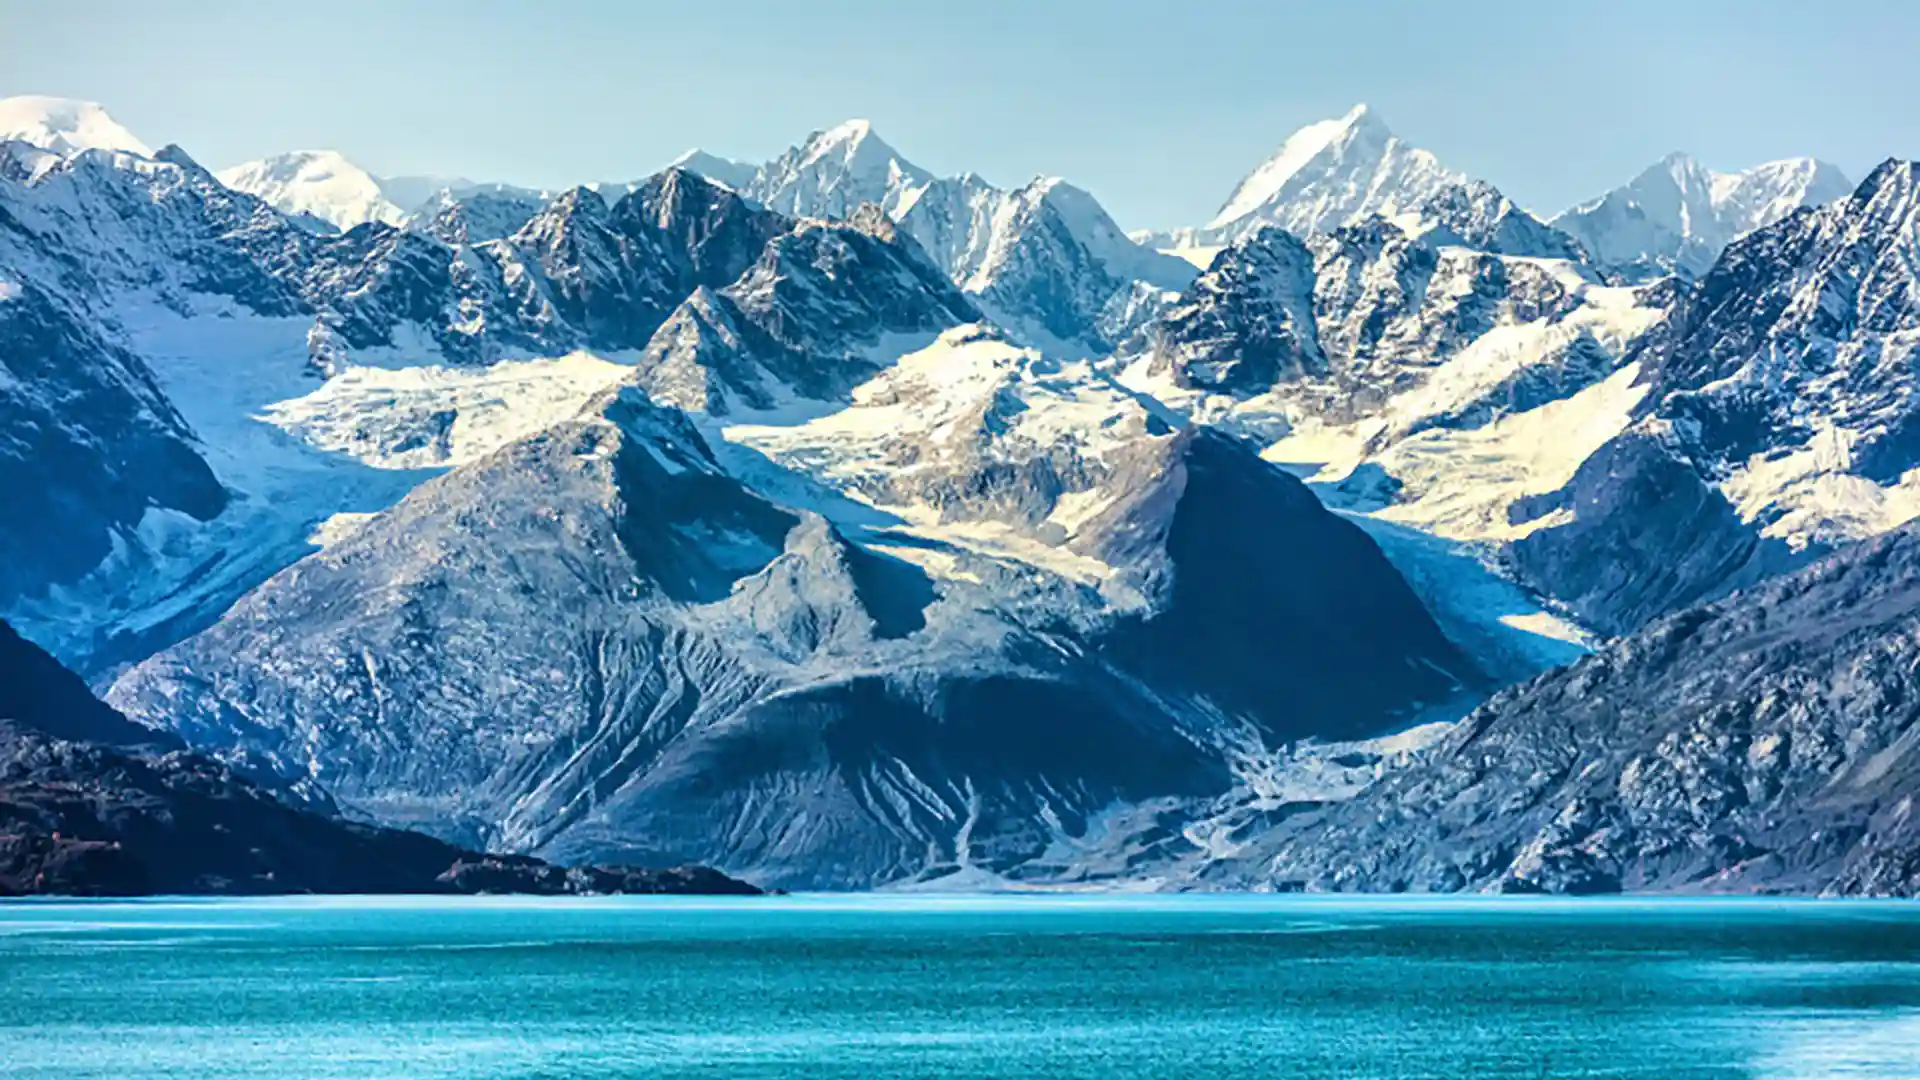 View of snowcapped mountains and glaciers in Glacier Bay National Park, Alaska.